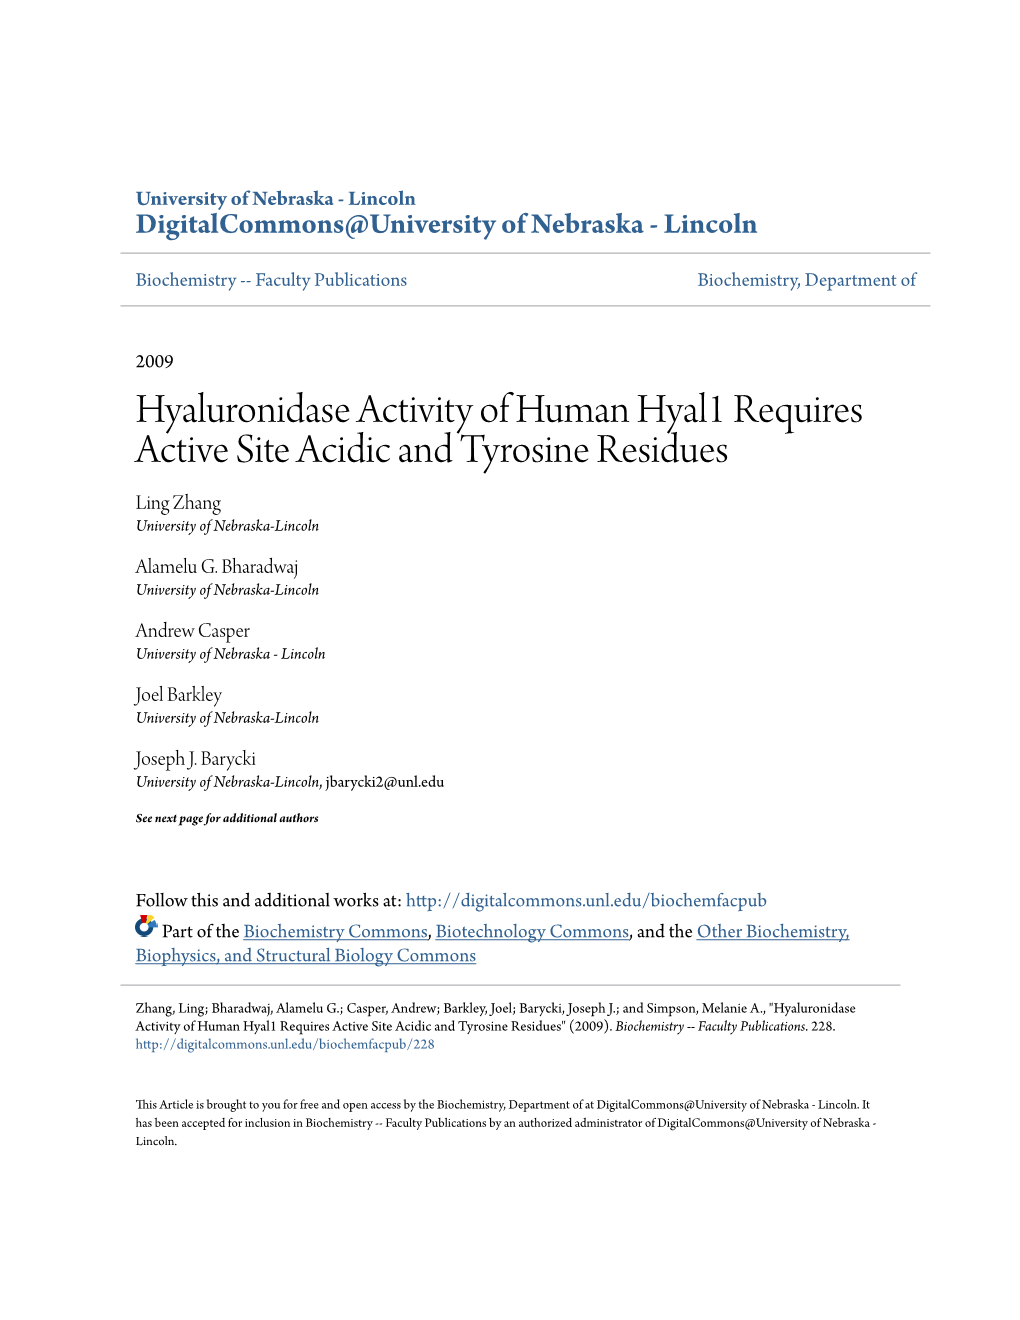 Hyaluronidase Activity of Human Hyal1 Requires Active Site Acidic and Tyrosine Residues Ling Zhang University of Nebraska-Lincoln